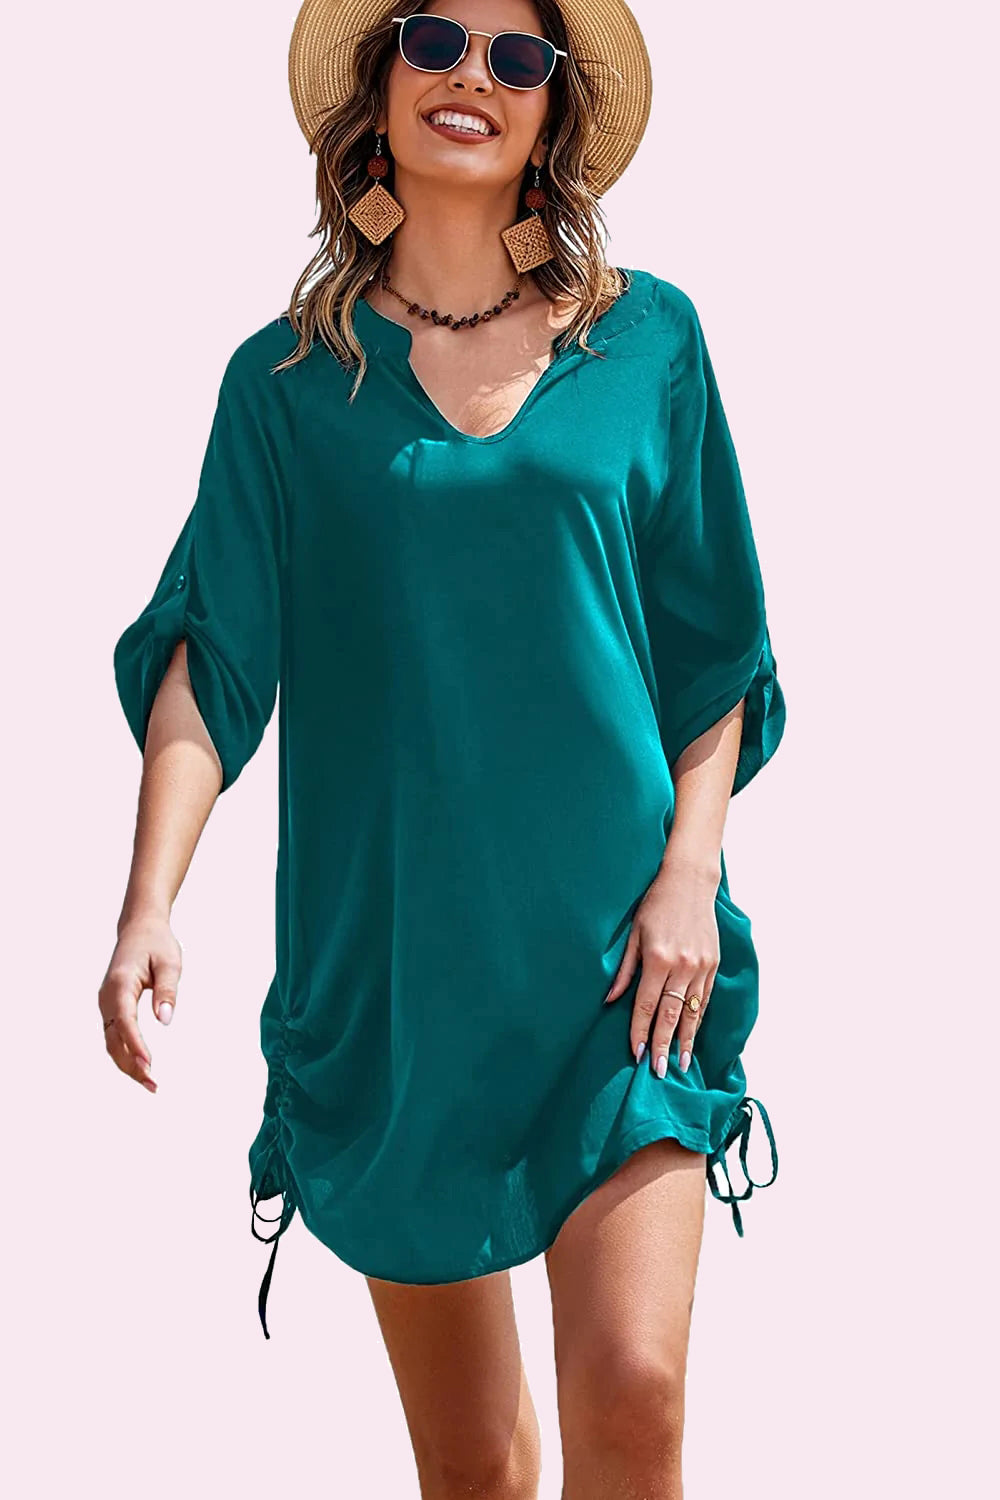 Avidlove Swimsuit Coverup for Beach Cover Up Dress V-Neck Bathing Suit Cover Ups Casual Loose Bikini Tunic Top